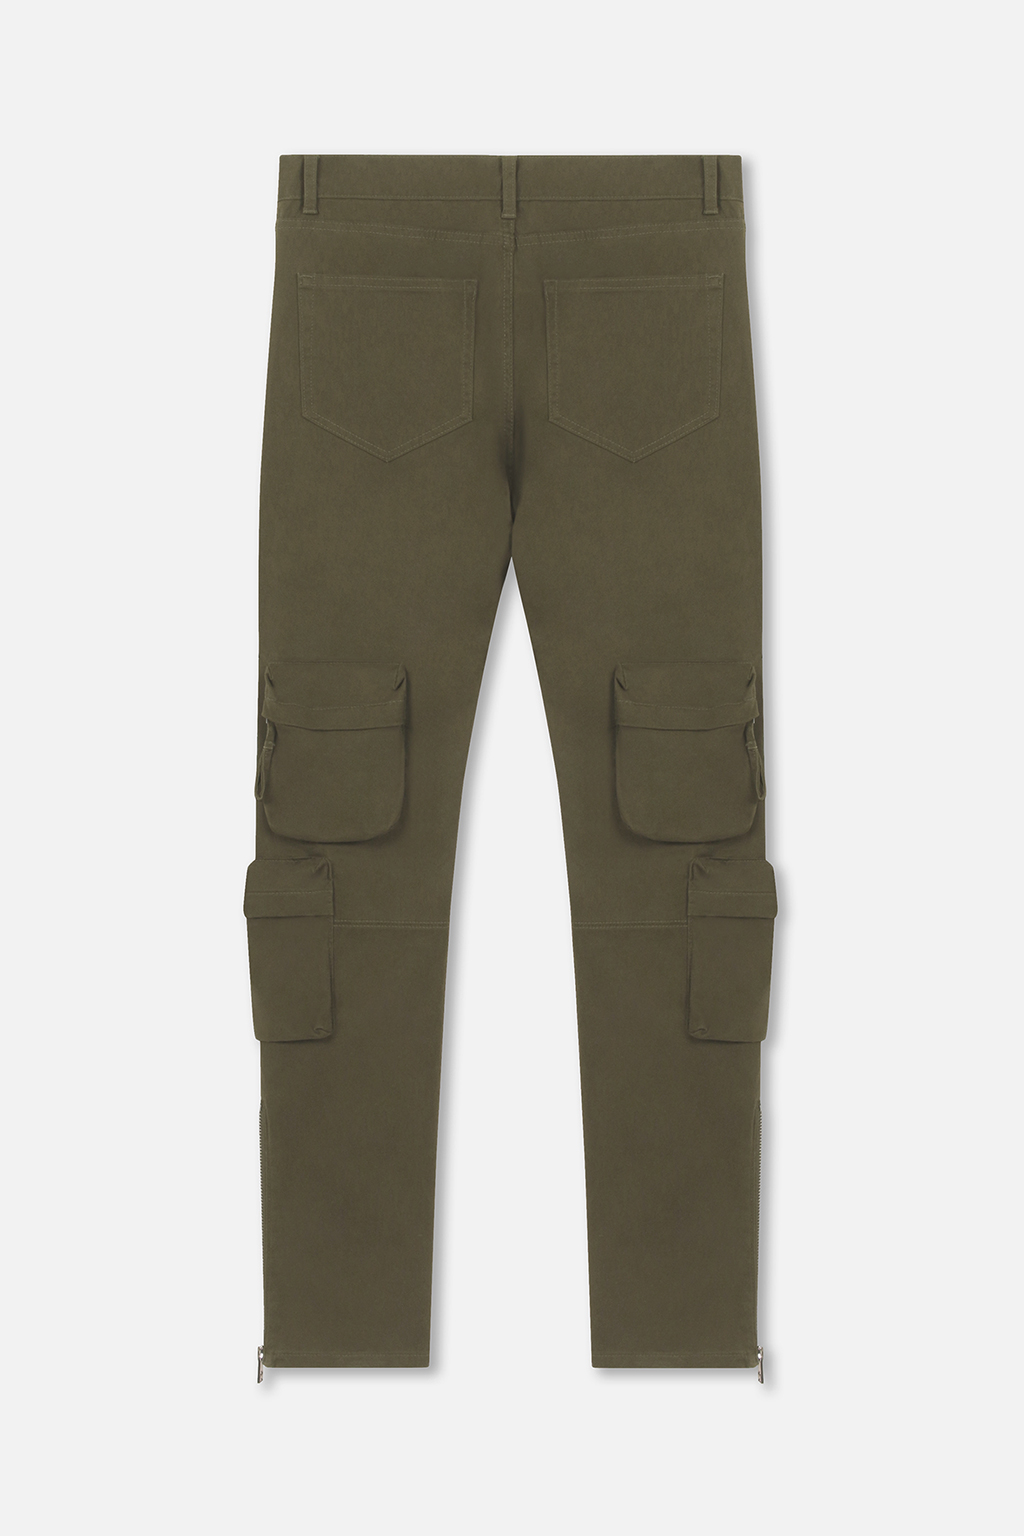 TYPE-2 SLIM CARGO PANTS - OLIVE - MLVINCE